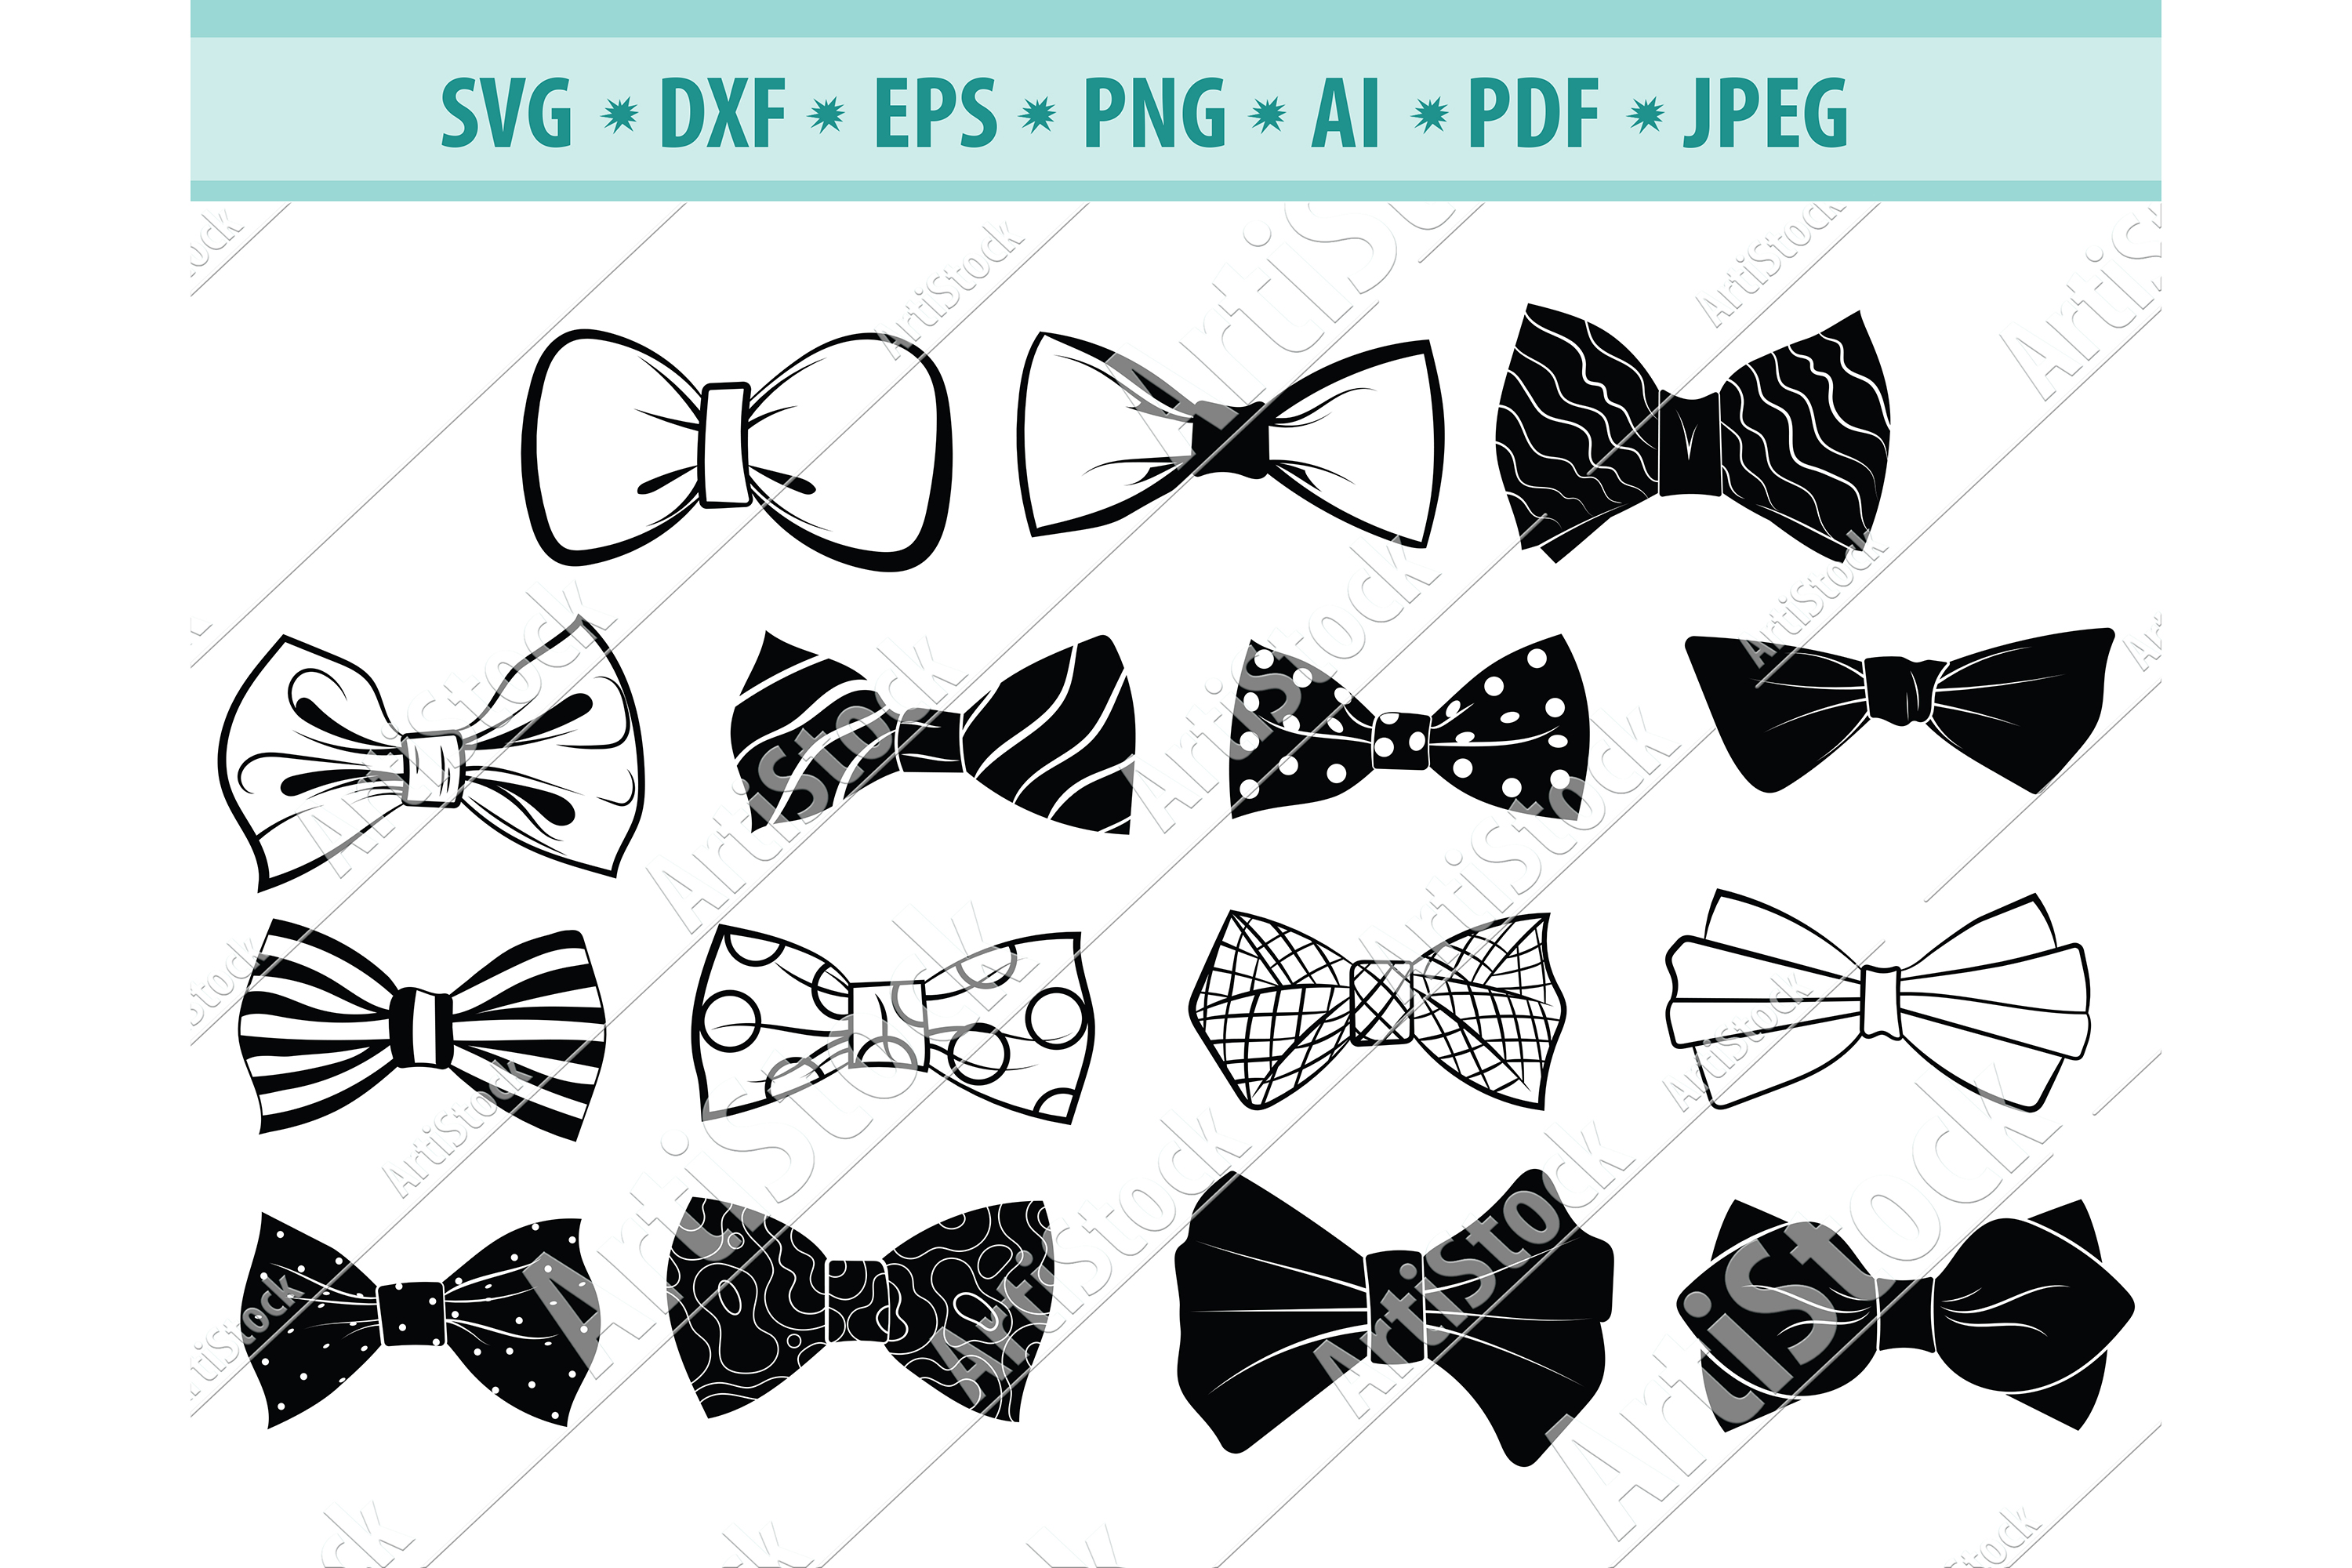 Free Svg Image Bow Tie - 55+ File for Free